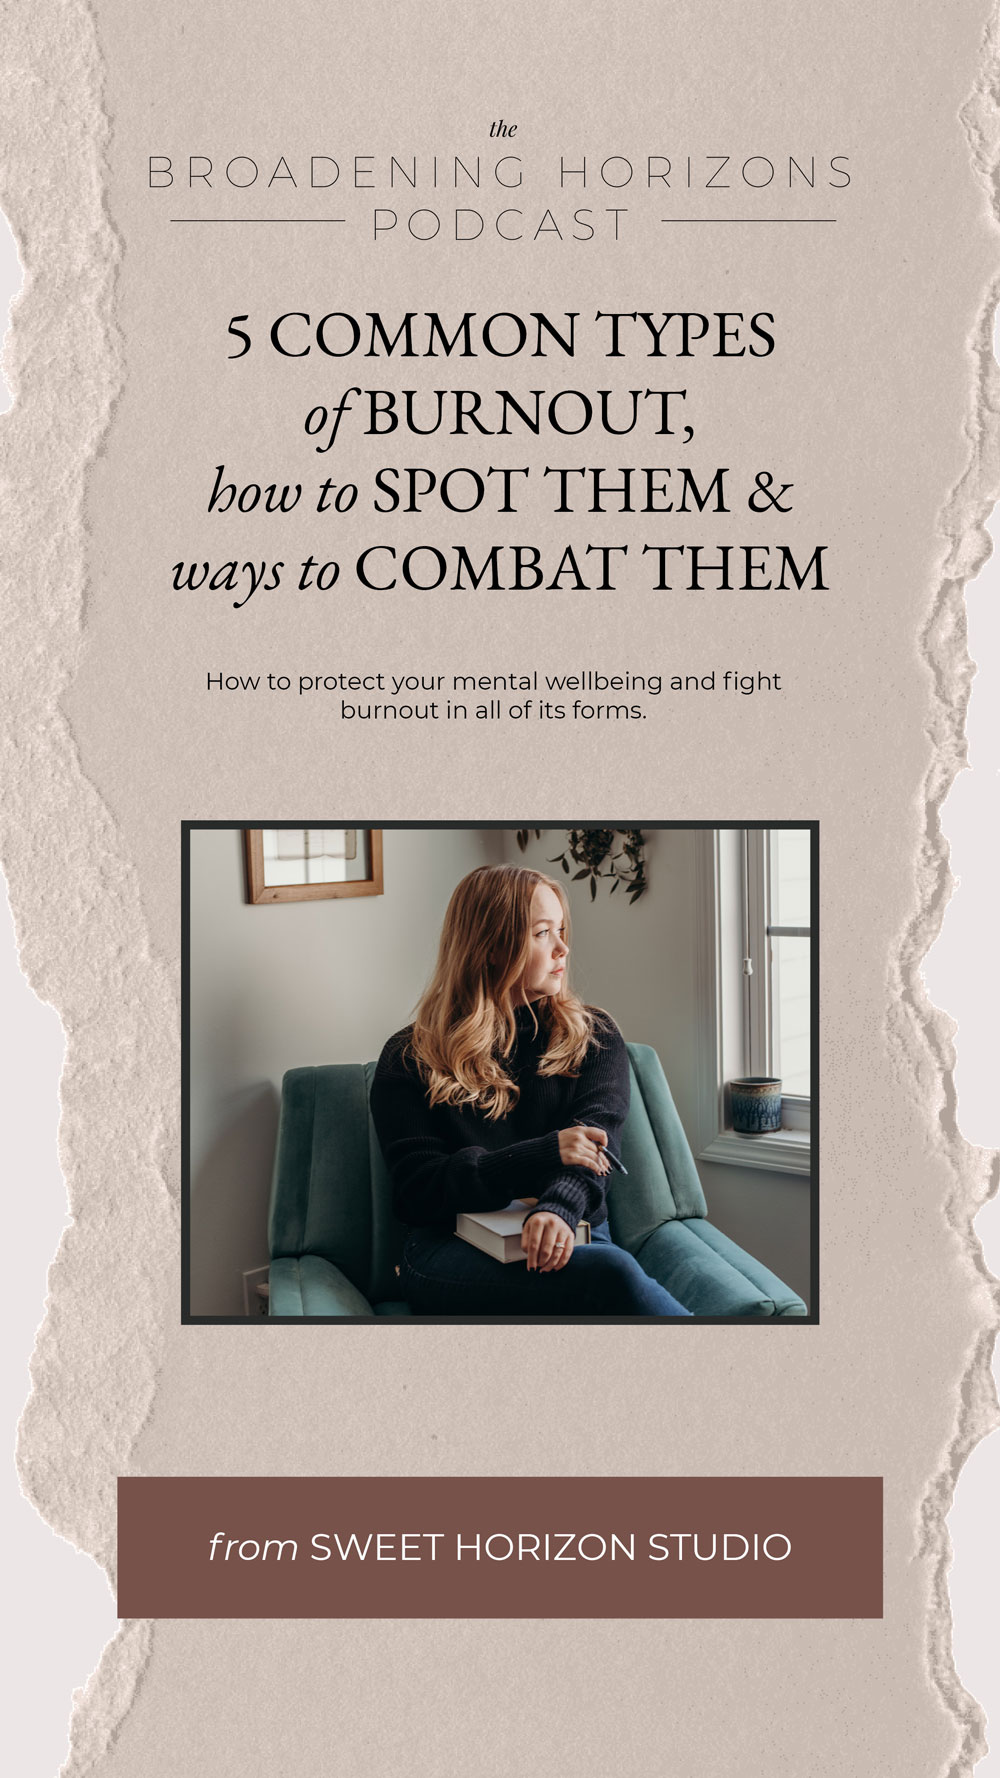 5 Common Types of Burnout, How to Spot Them & Ways to Combat Them from www.sweethorizonblog.com